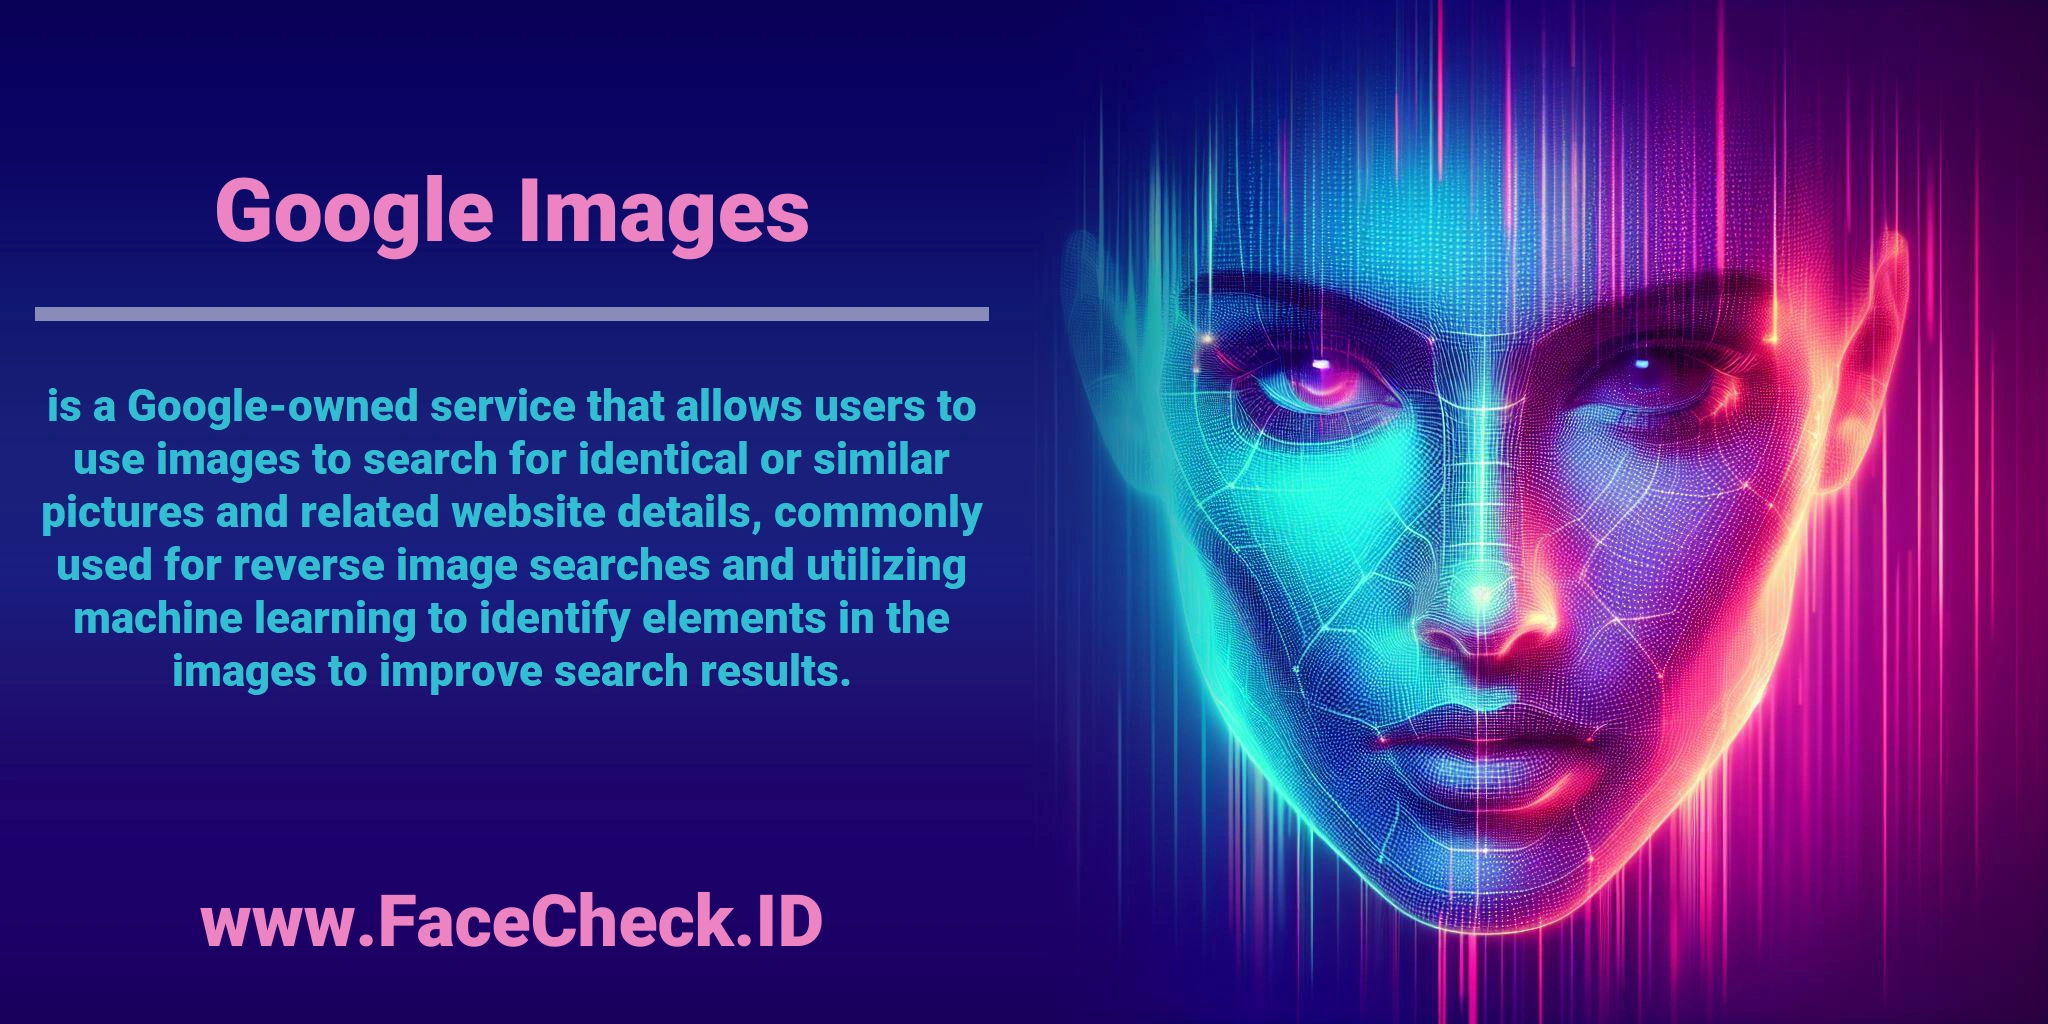 <b>Google Images</b> is a Google-owned service that allows users to use images to search for identical or similar pictures and related website details, commonly used for reverse image searches and utilizing machine learning to identify elements in the images to improve search results.
